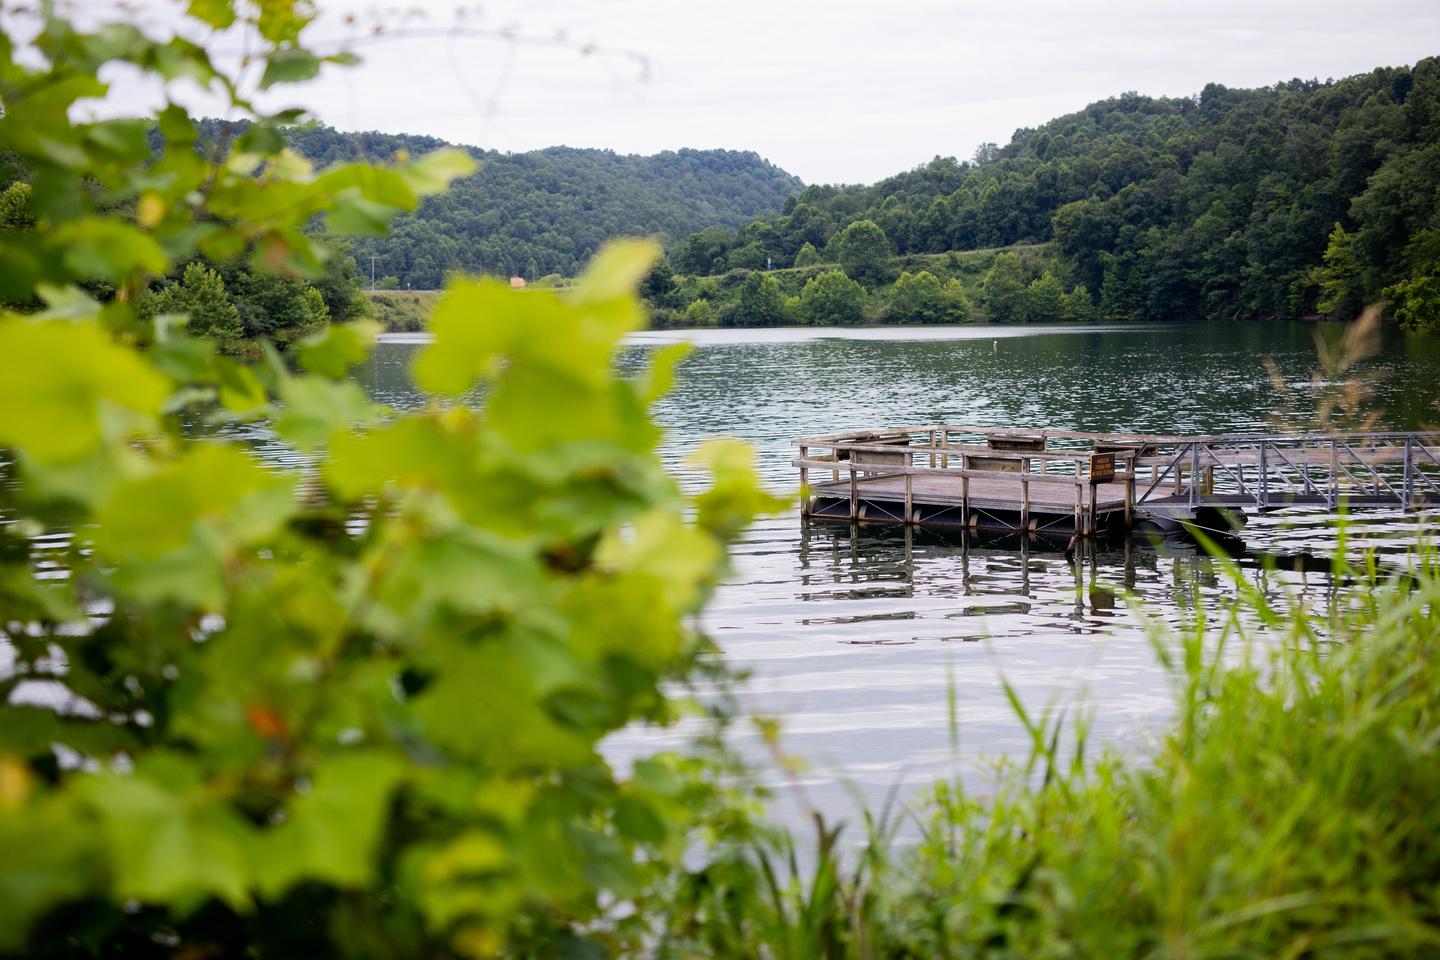 Here's the No. 1 bass fishing lake in WV. And it has great hunting too! -  WVDNR